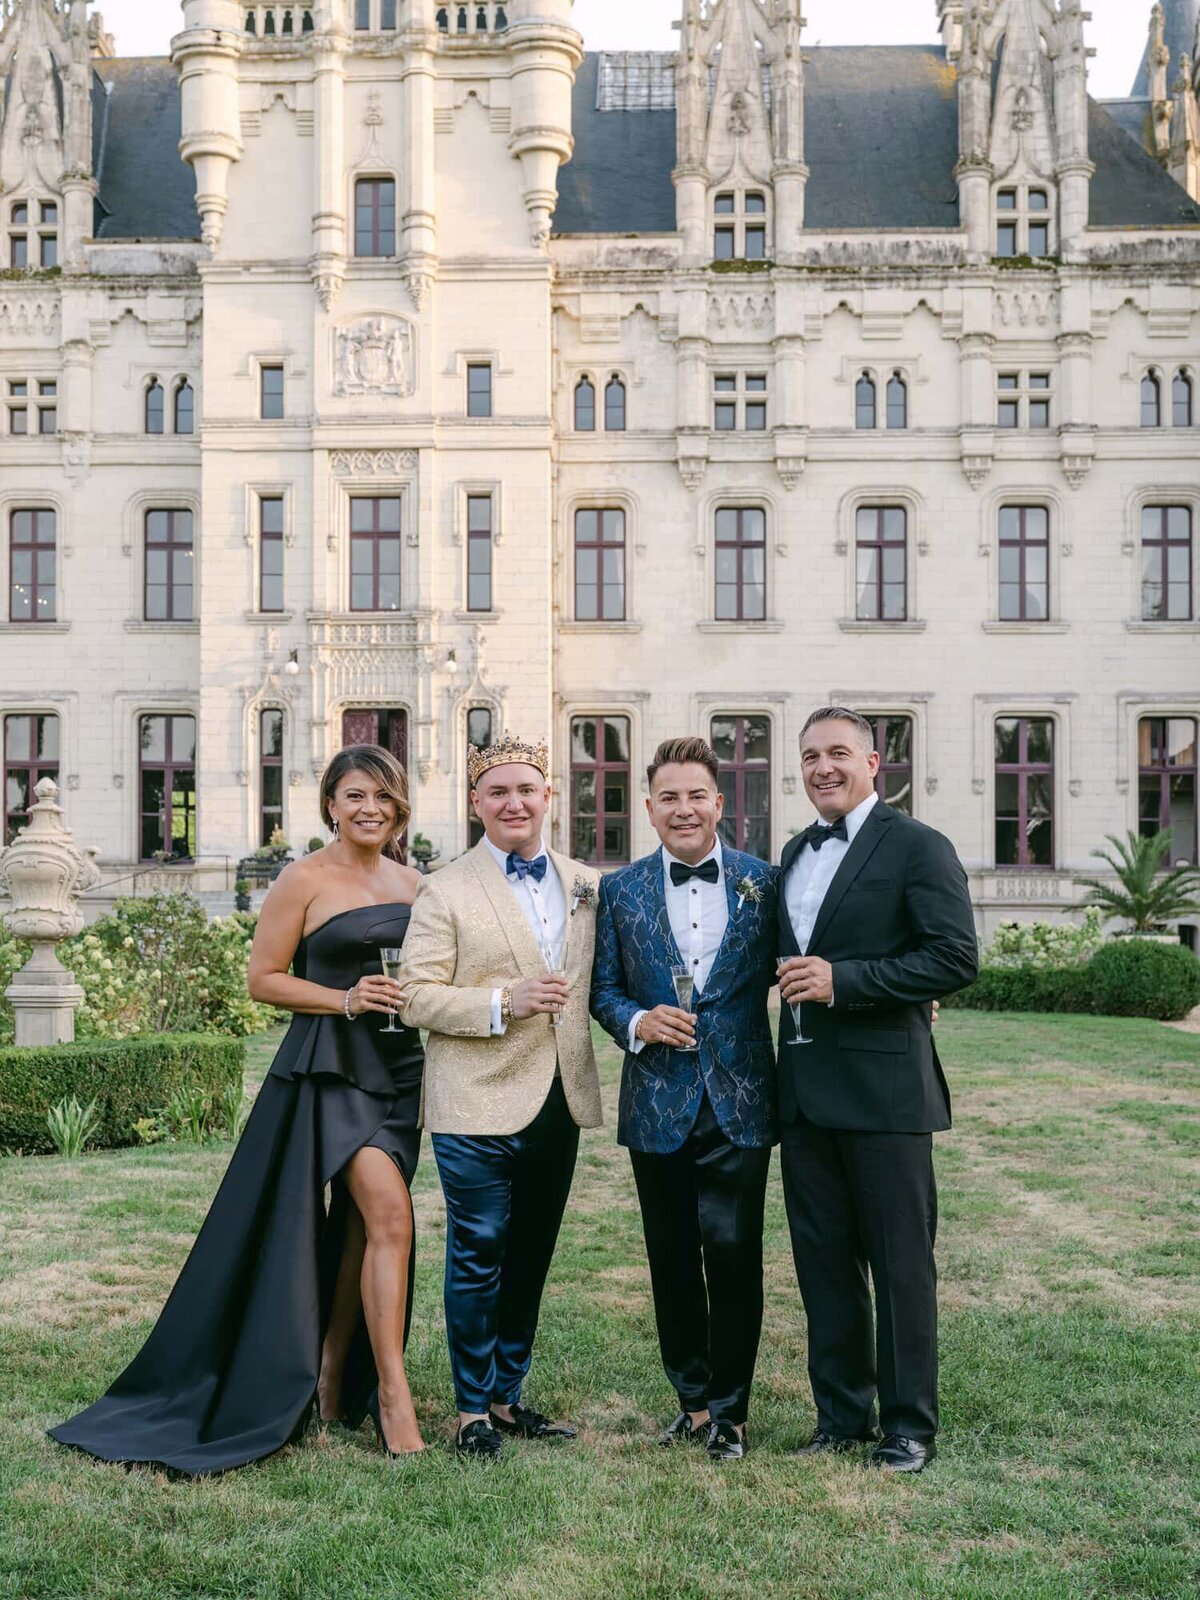 Destination wedding in France - Chateau Challain - Serenity Photography - 68